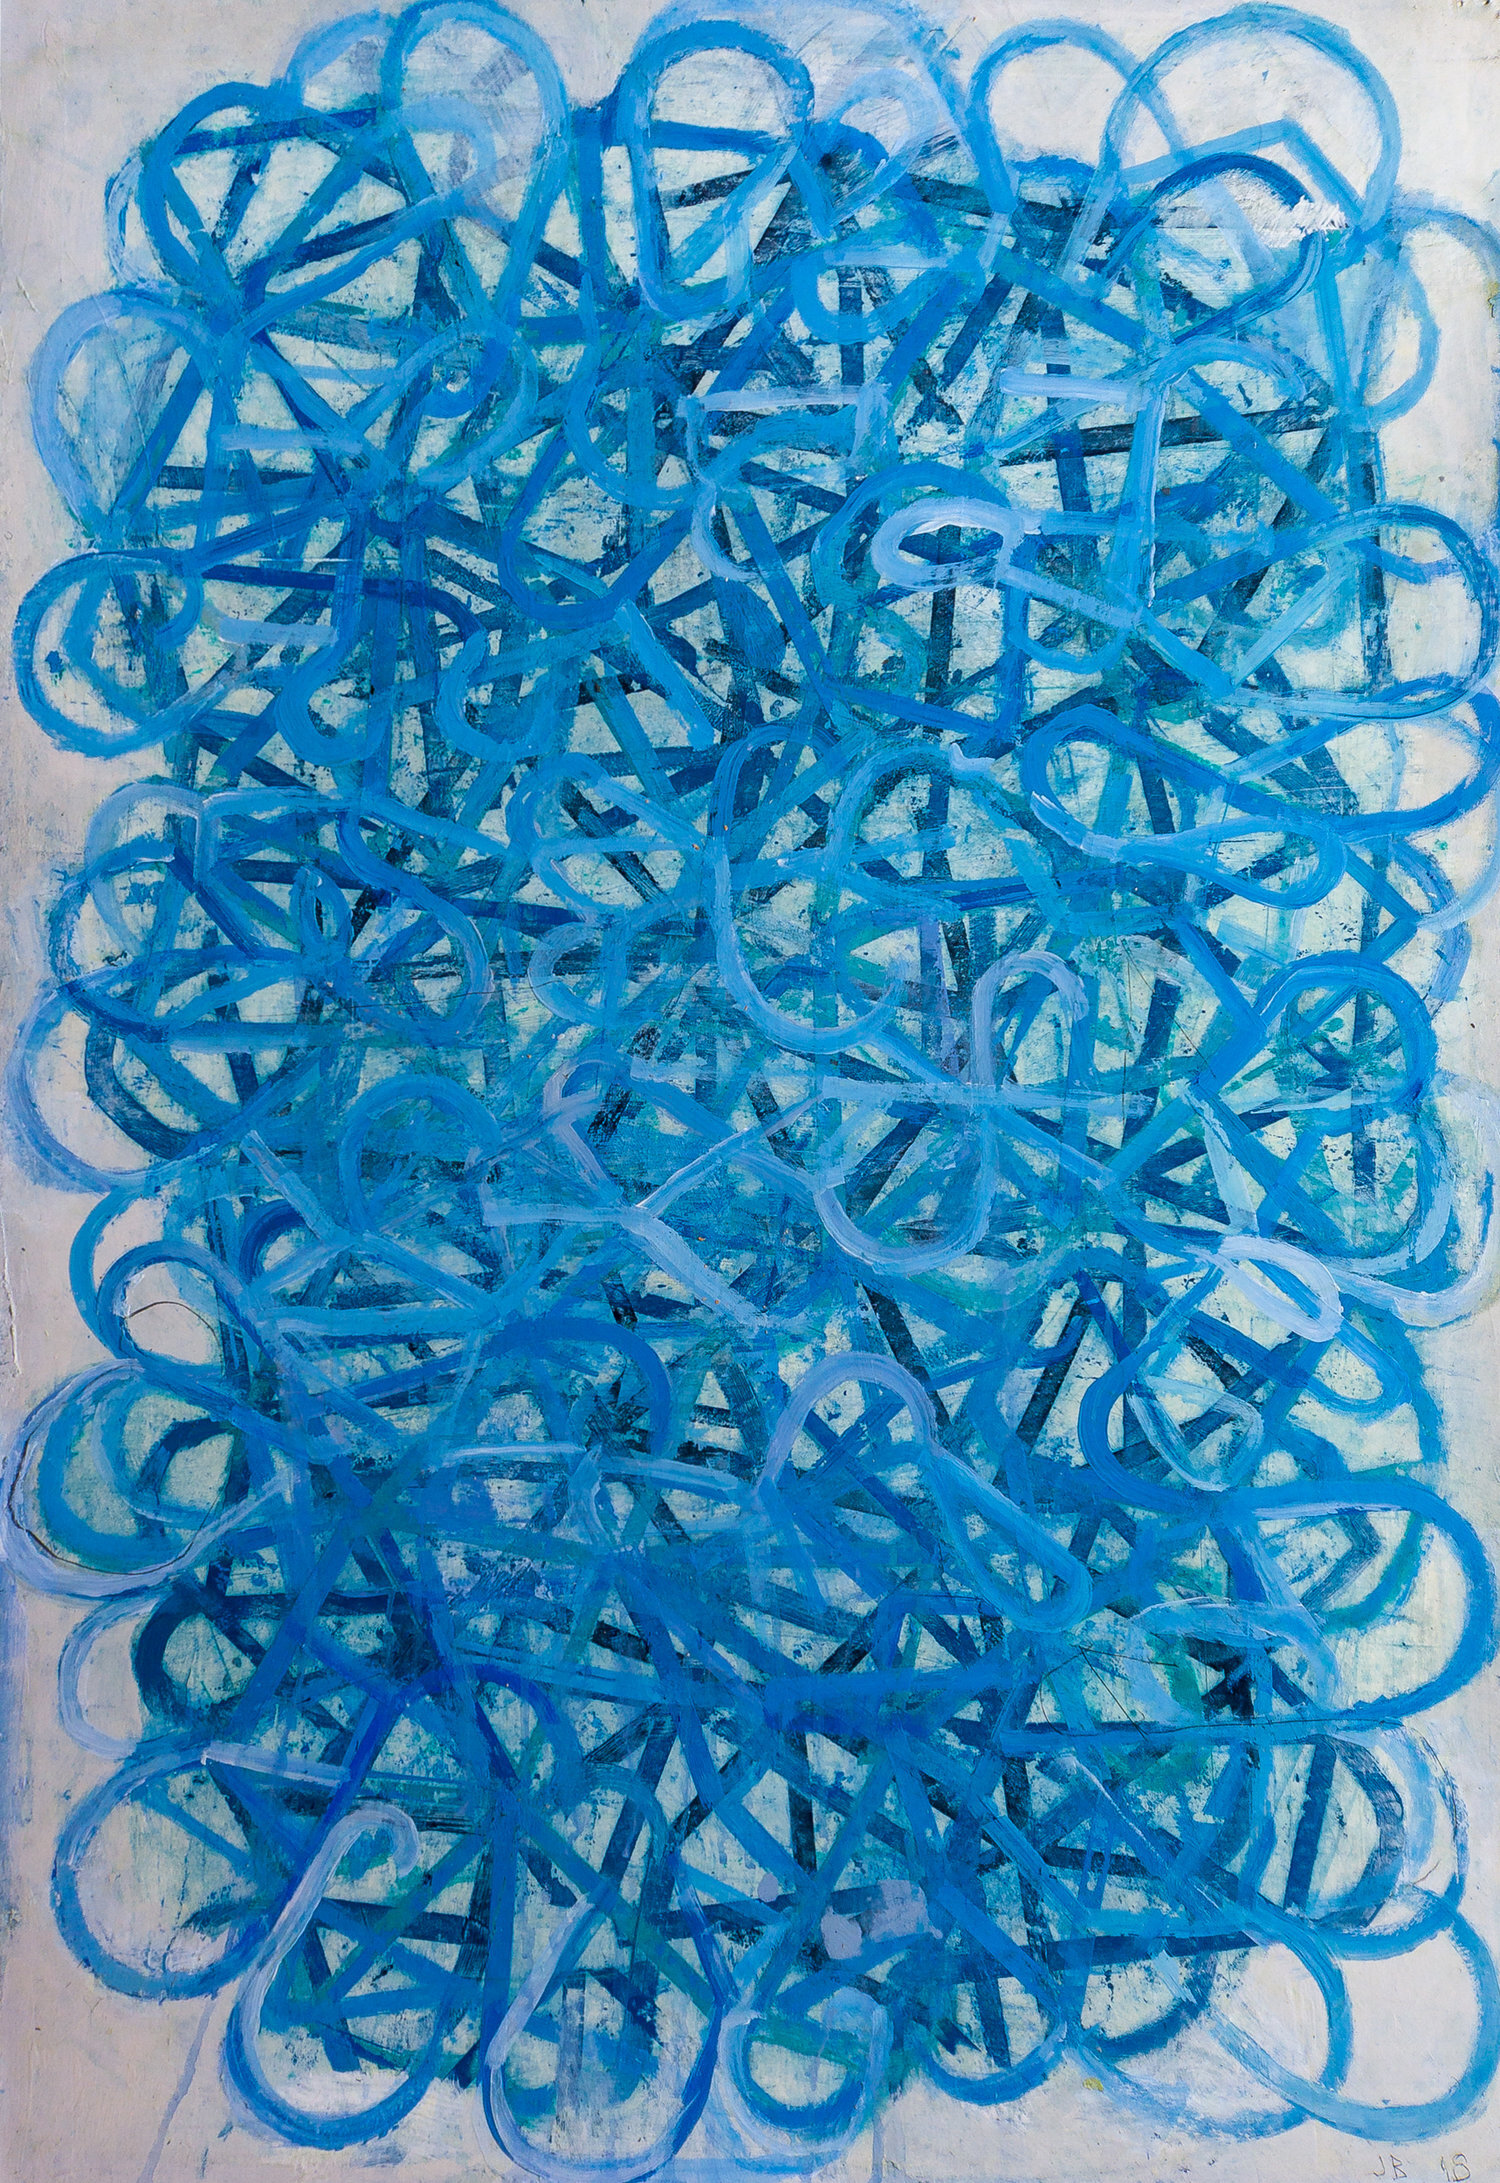  John Belingheri   Strands,   2018 Acrylic and oil on canvas 35 x 22 in. YIMBY price $1,800   SOLD  